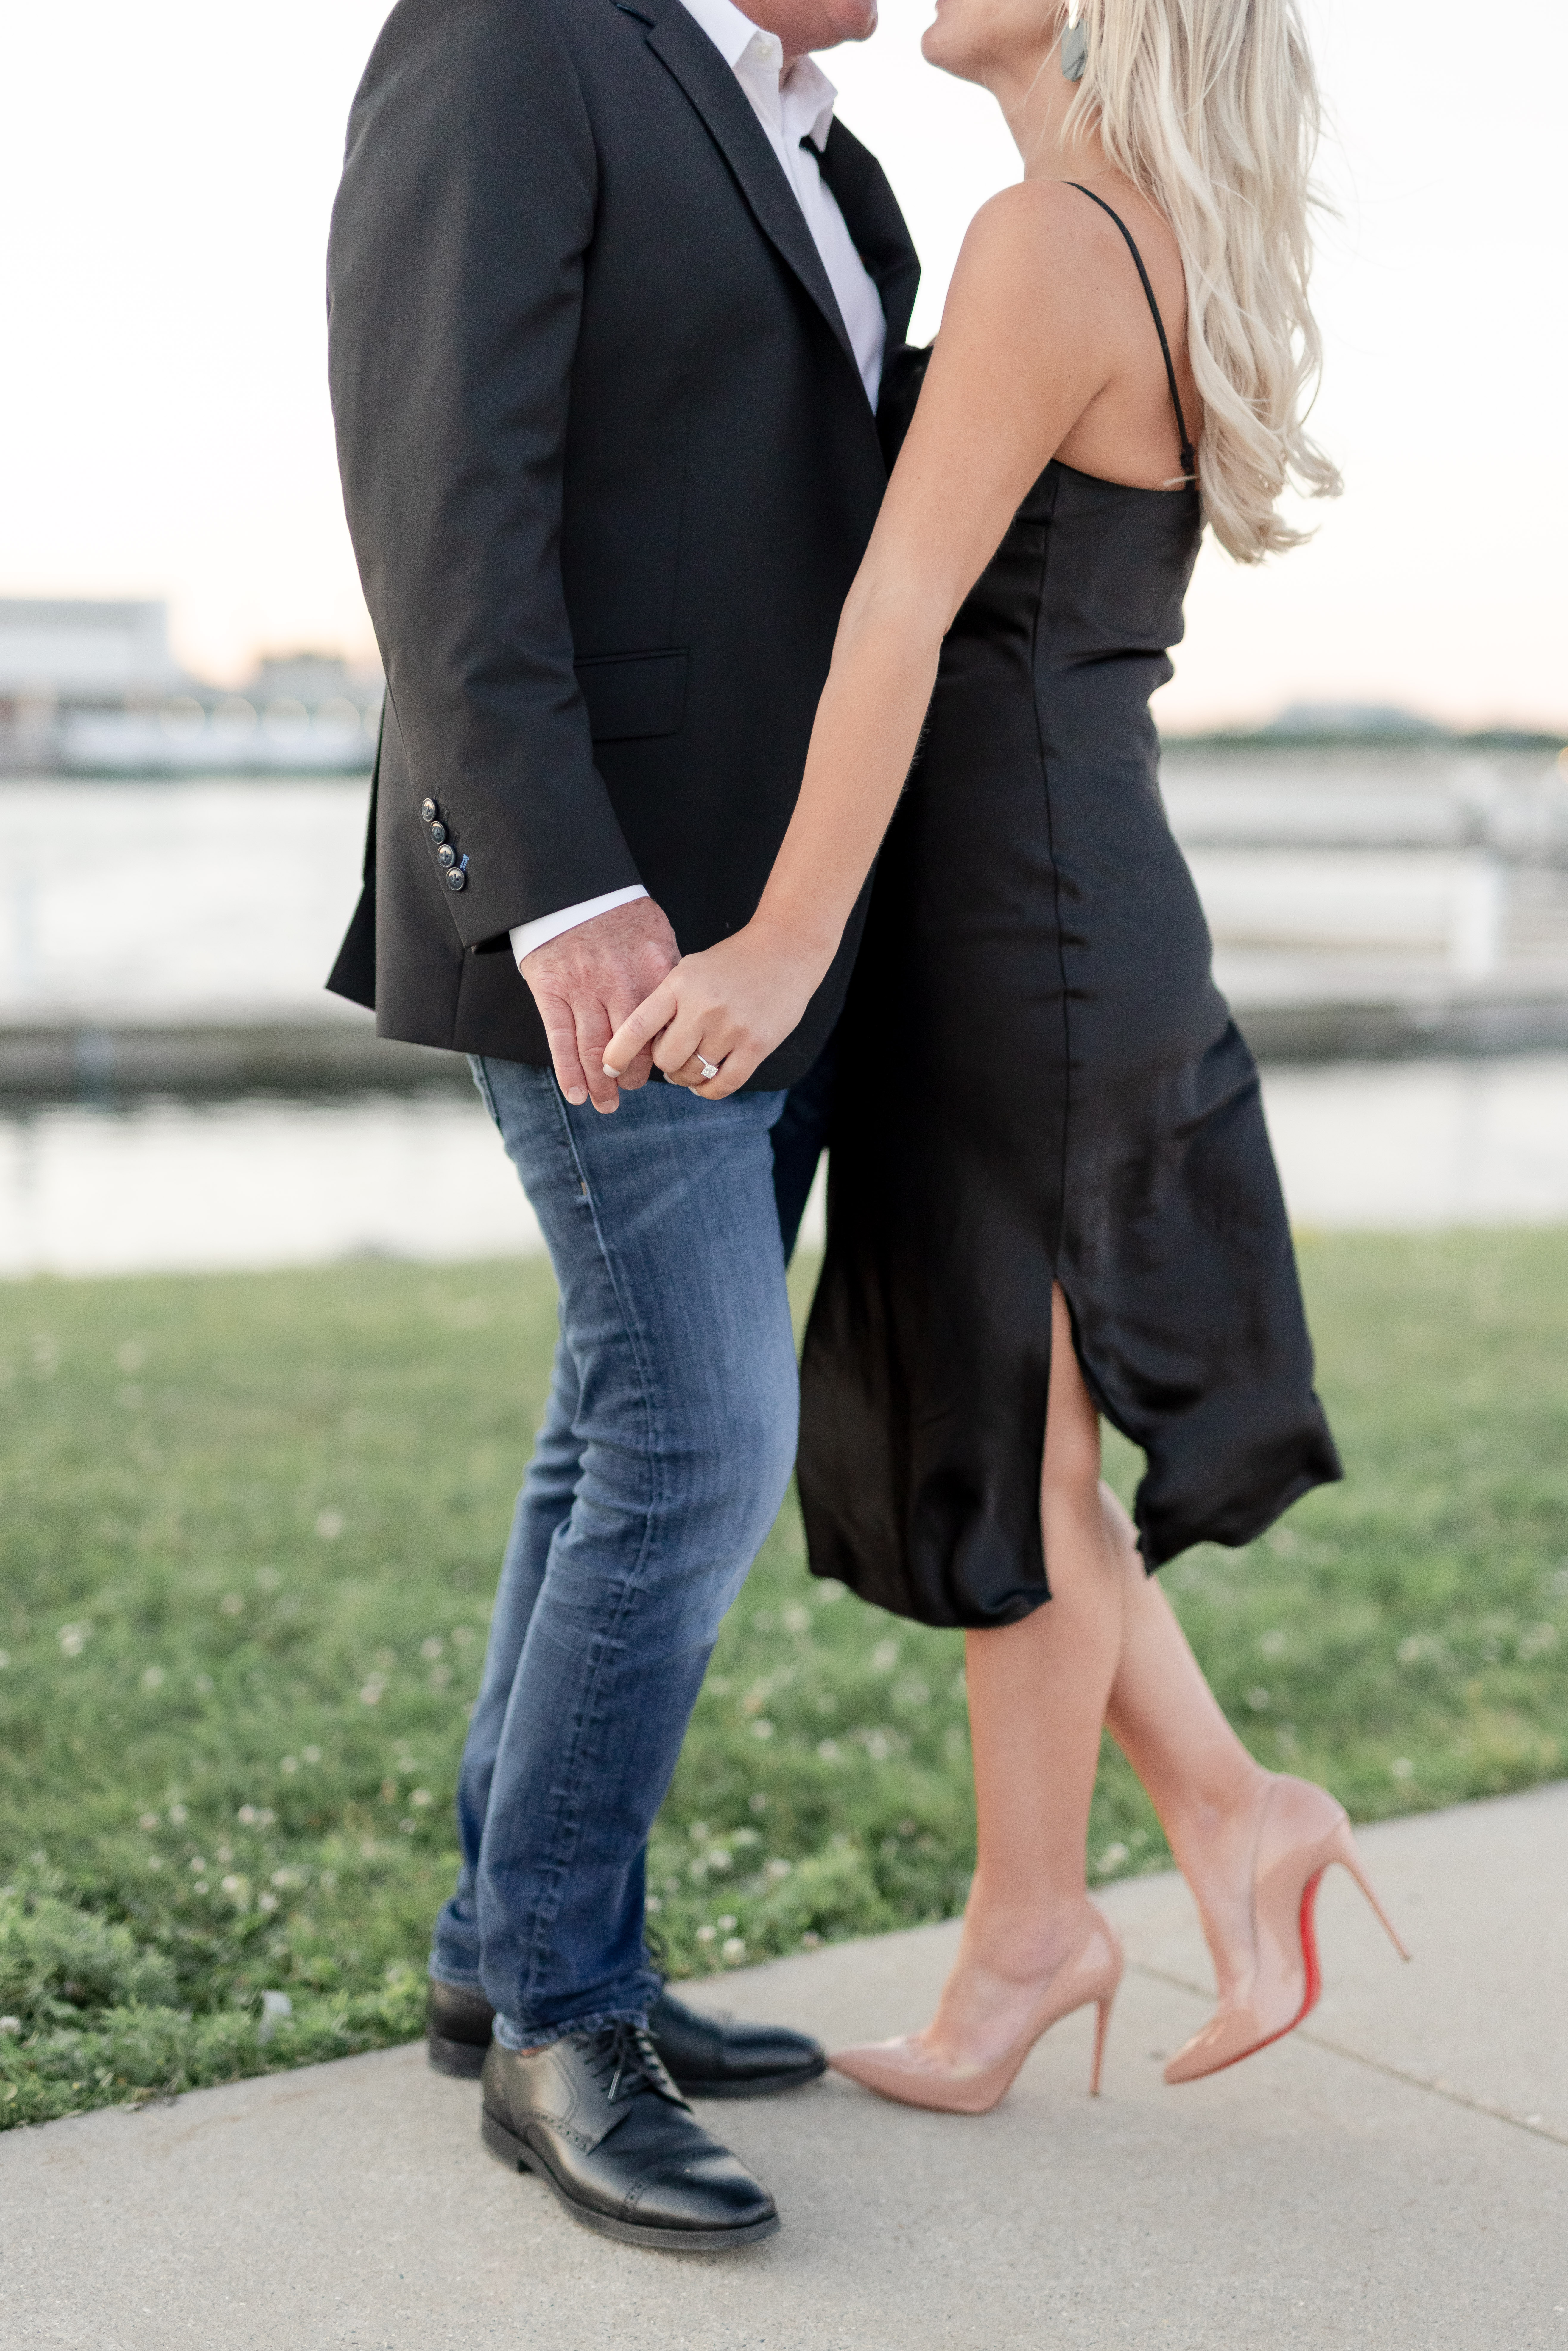 engagement-session-outfits